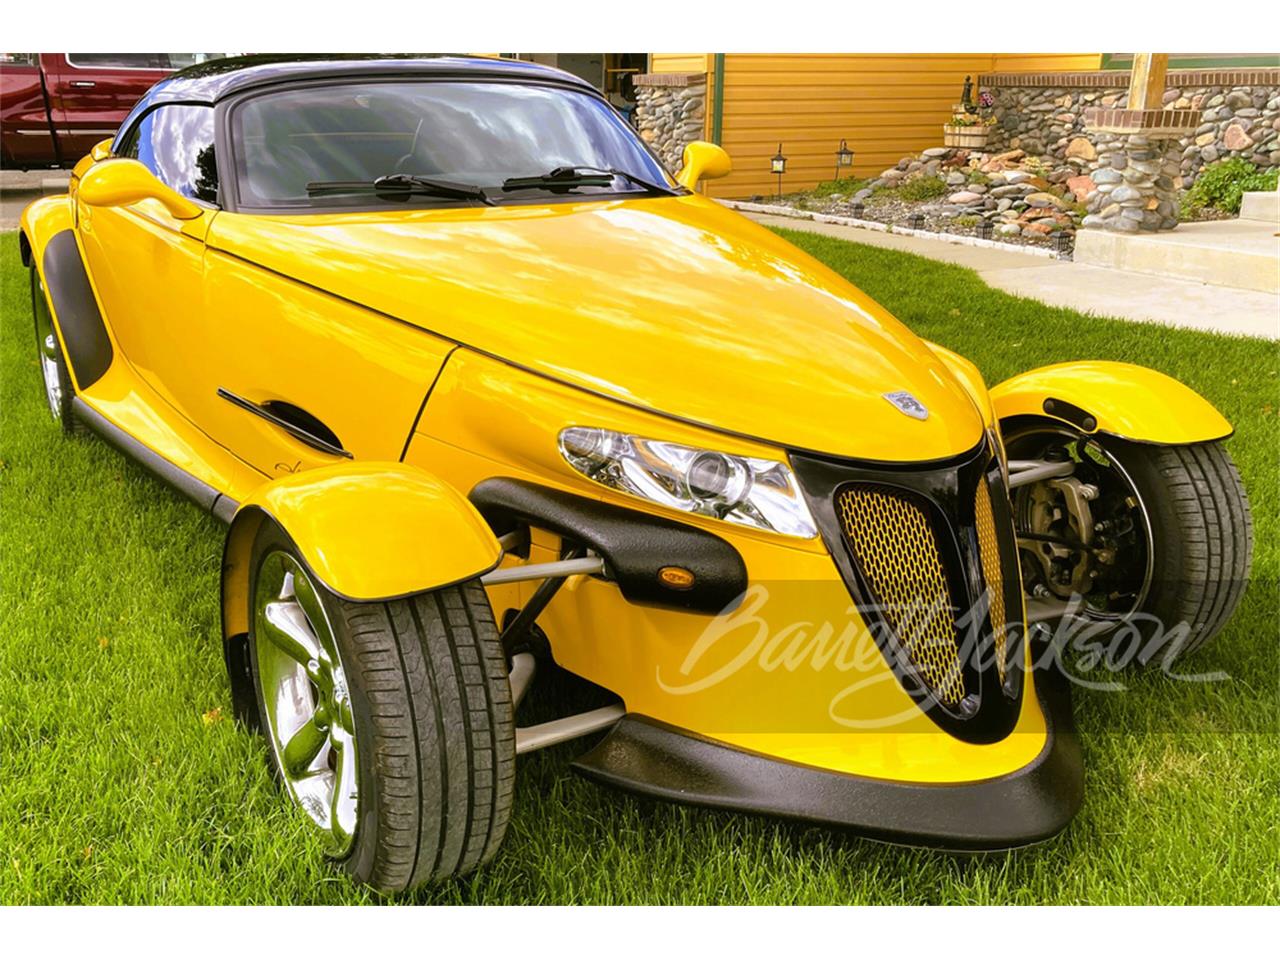 For Sale at Auction: 2000 Plymouth Prowler in Scottsdale, Arizona for sale in Scottsdale, AZ